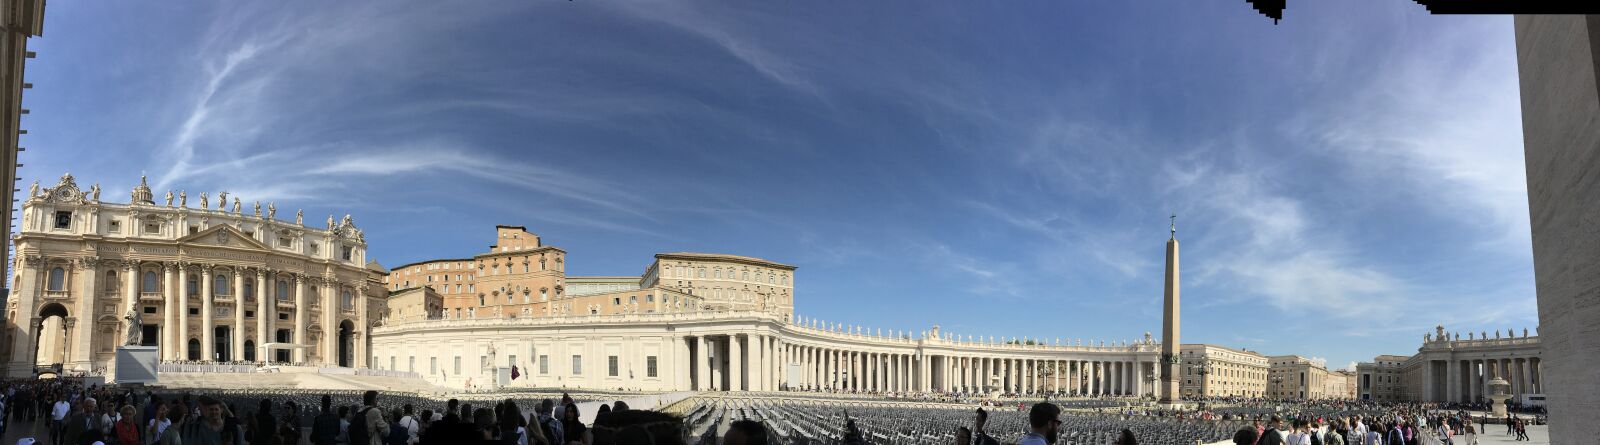 Apple iPad Pro sample photo. St, peters square, vatican photography